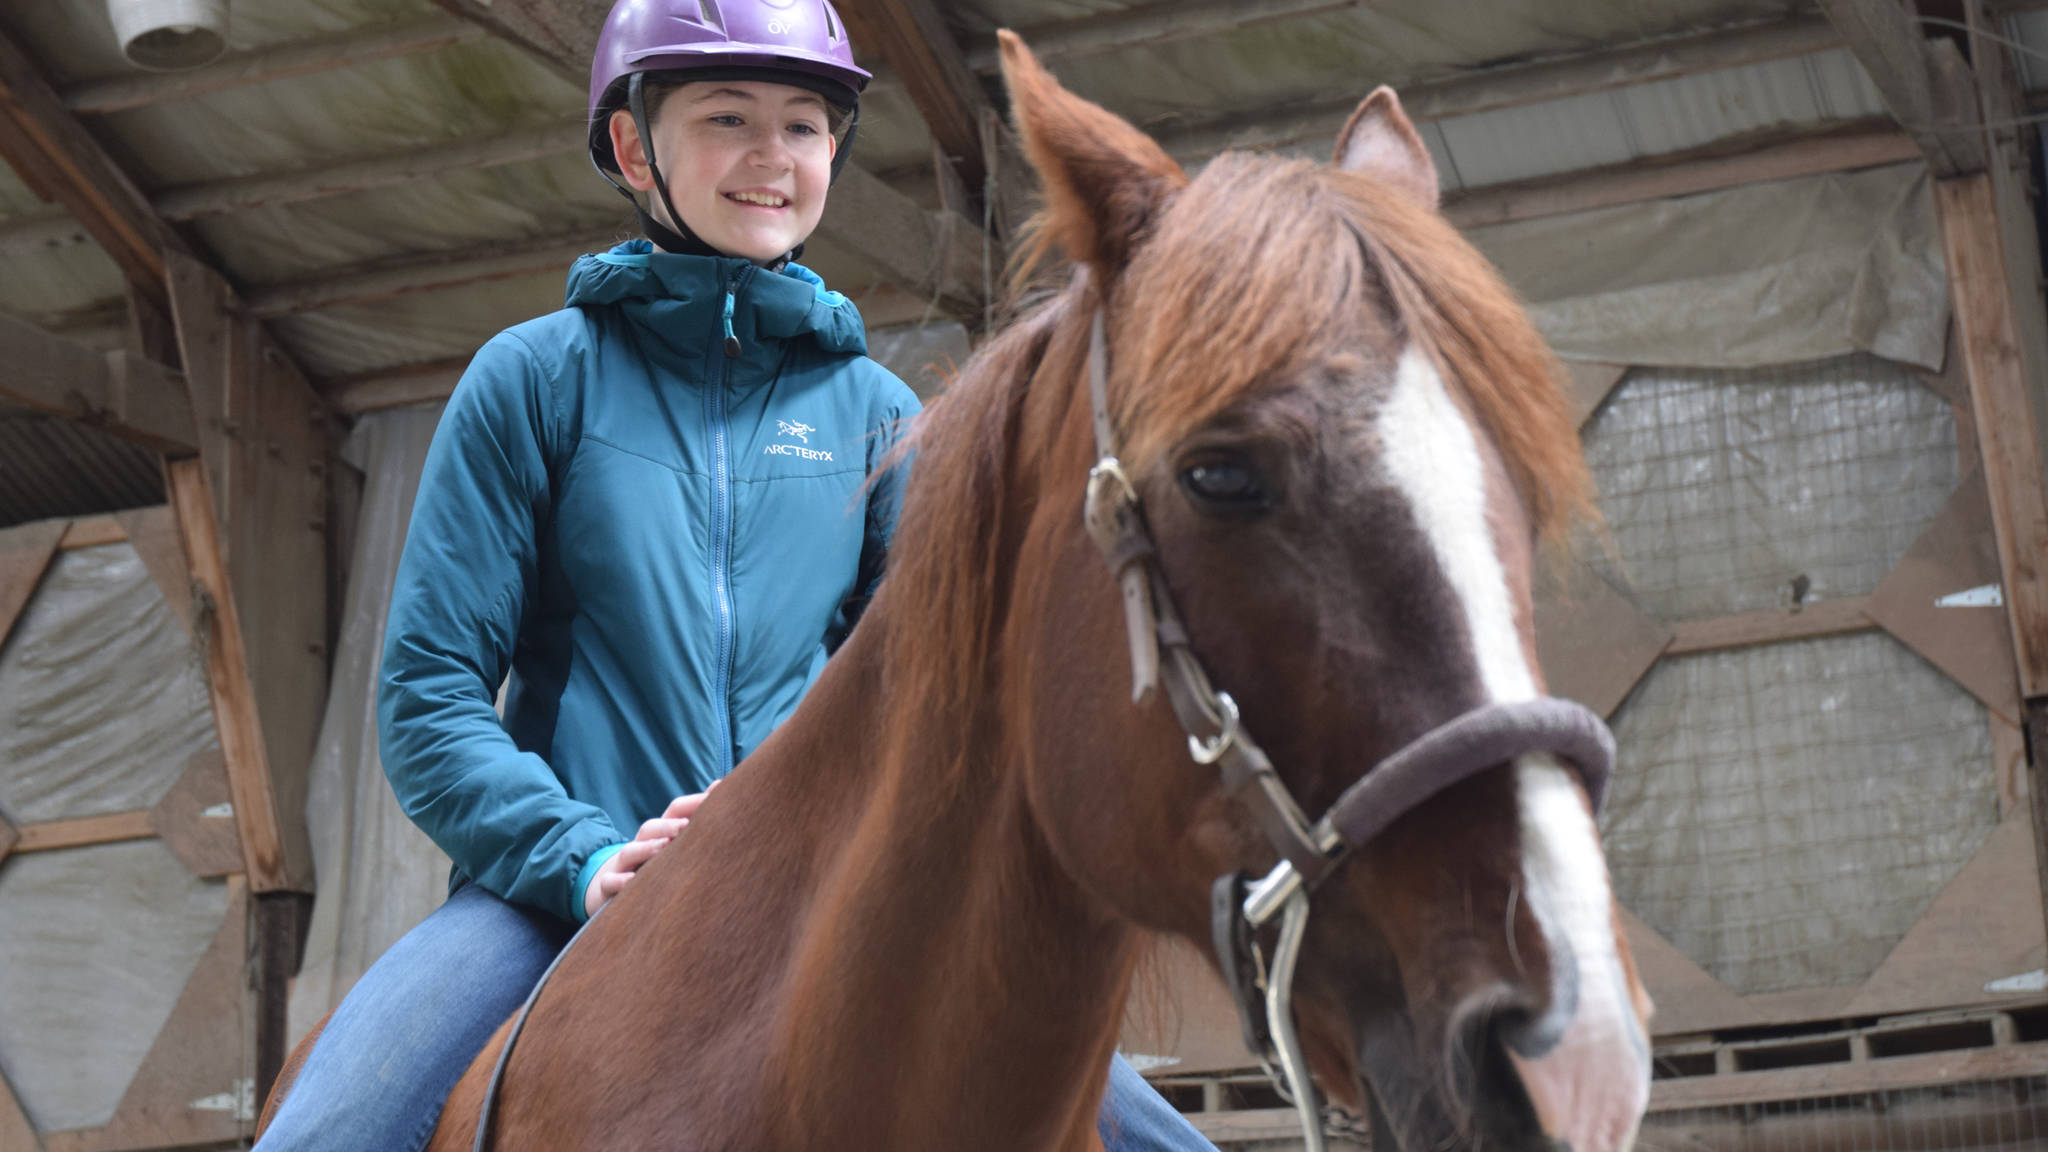 Kate Debuse, 14, smiles as she takes a break in riding her horse Sweetie in the Fairweather Barn, Tuesday, June 7. (Nolin Ainsworth | Juneau Empire)